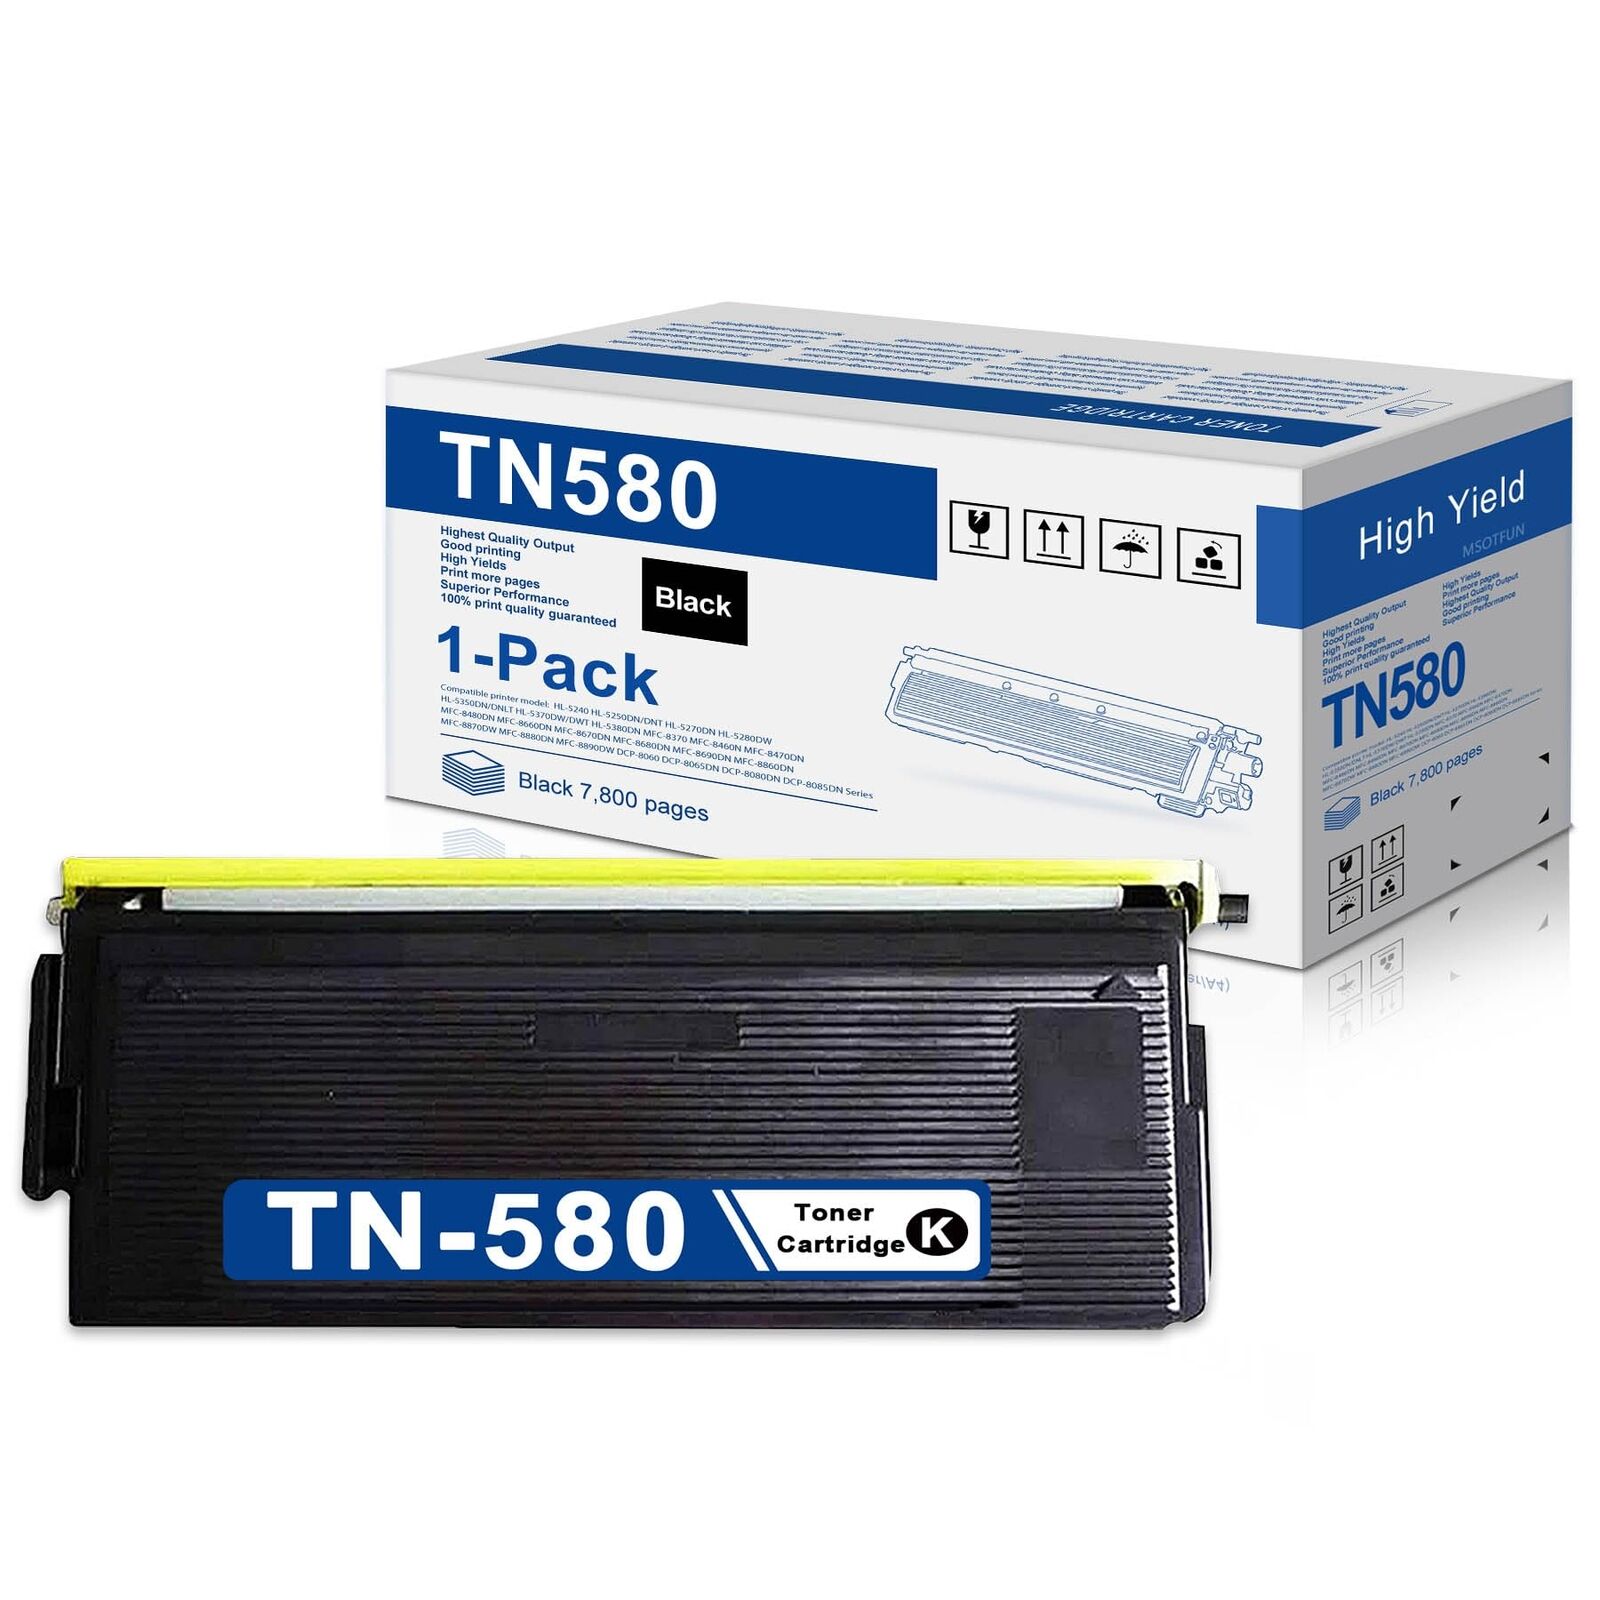 TN-580 TN580 Black Toner Cartridge Replacement for Brother TN-580 High-Yield